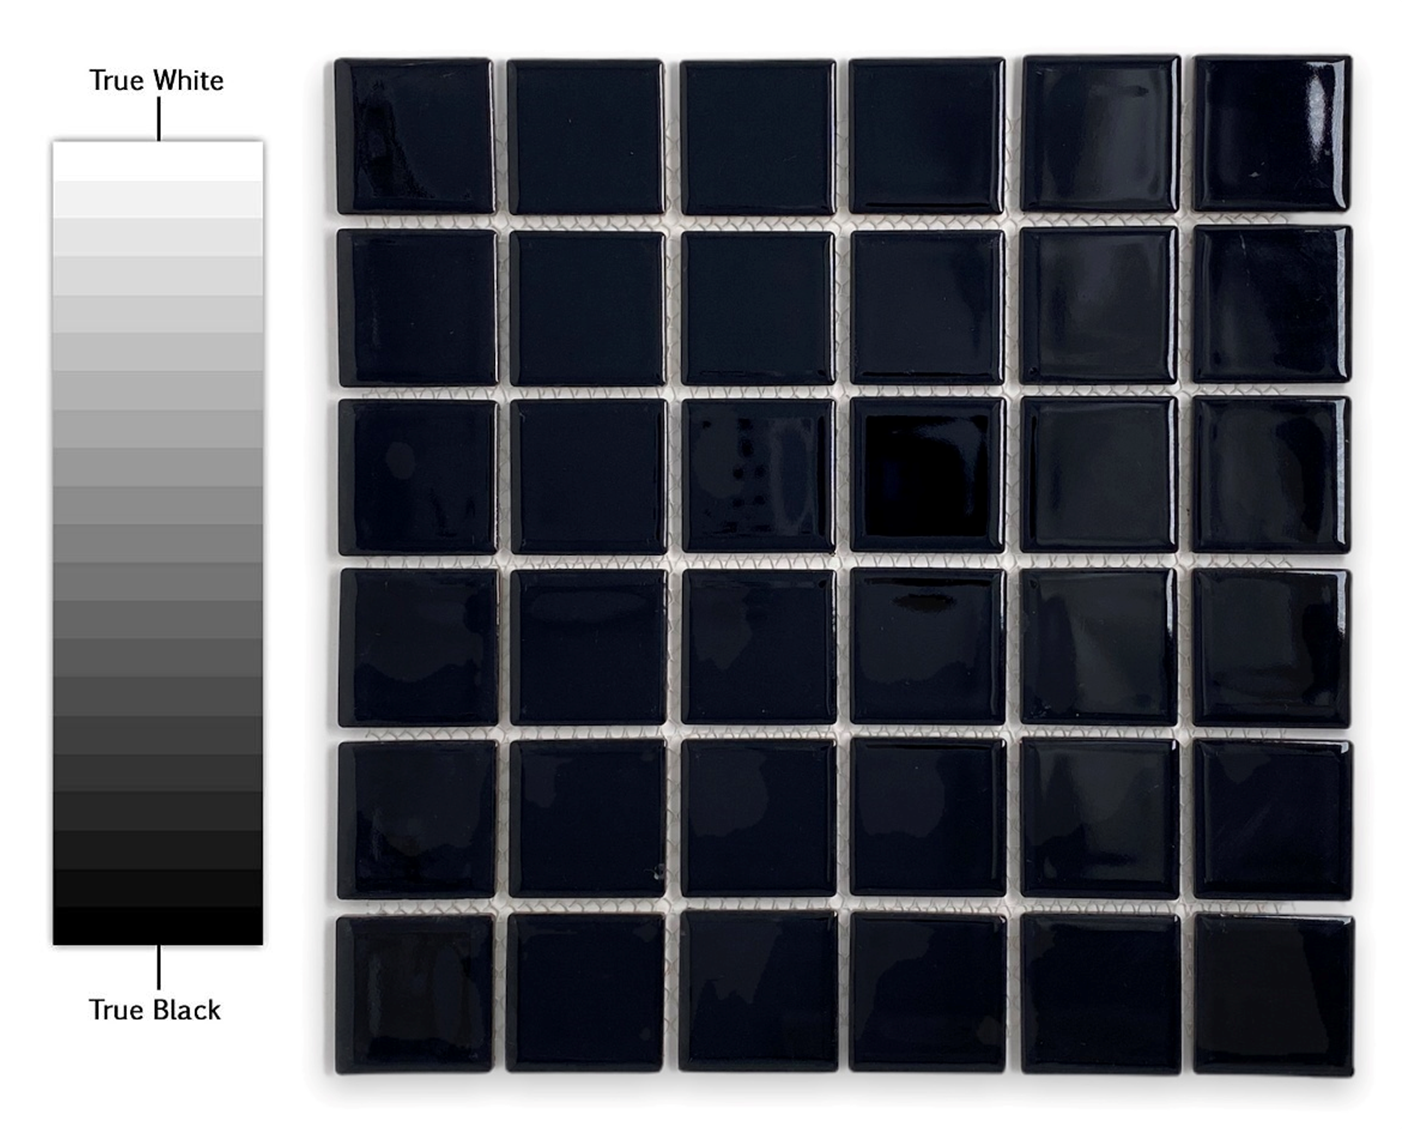 Tenedos Premium Quality 2" (Exact Size 1-15/16 in.) Black Porcelain Square Mosaic Tile Shiny Look Designed in Italy (12x12) for Kitchen Backsplash, Pool Tile, Bathroom Wall, Accent Wall